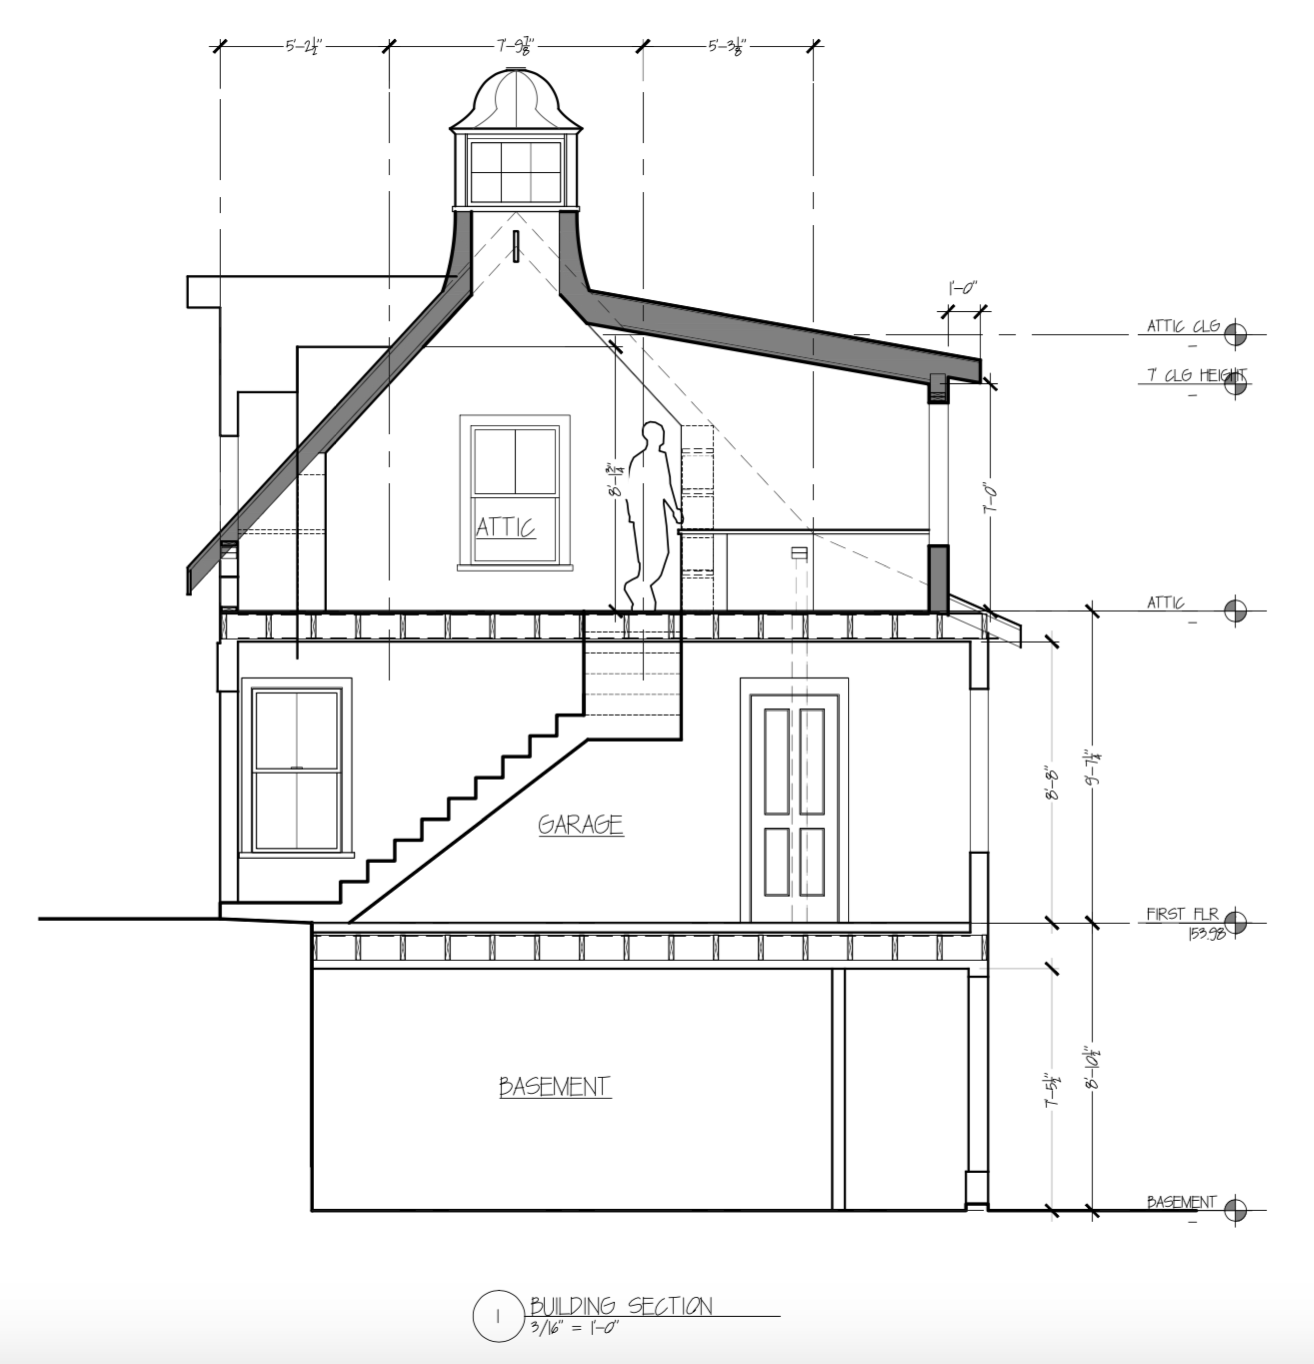 The Plan: My Carriage Barn Design Studio | Kelly Rogers Interiors | Interiors for Families